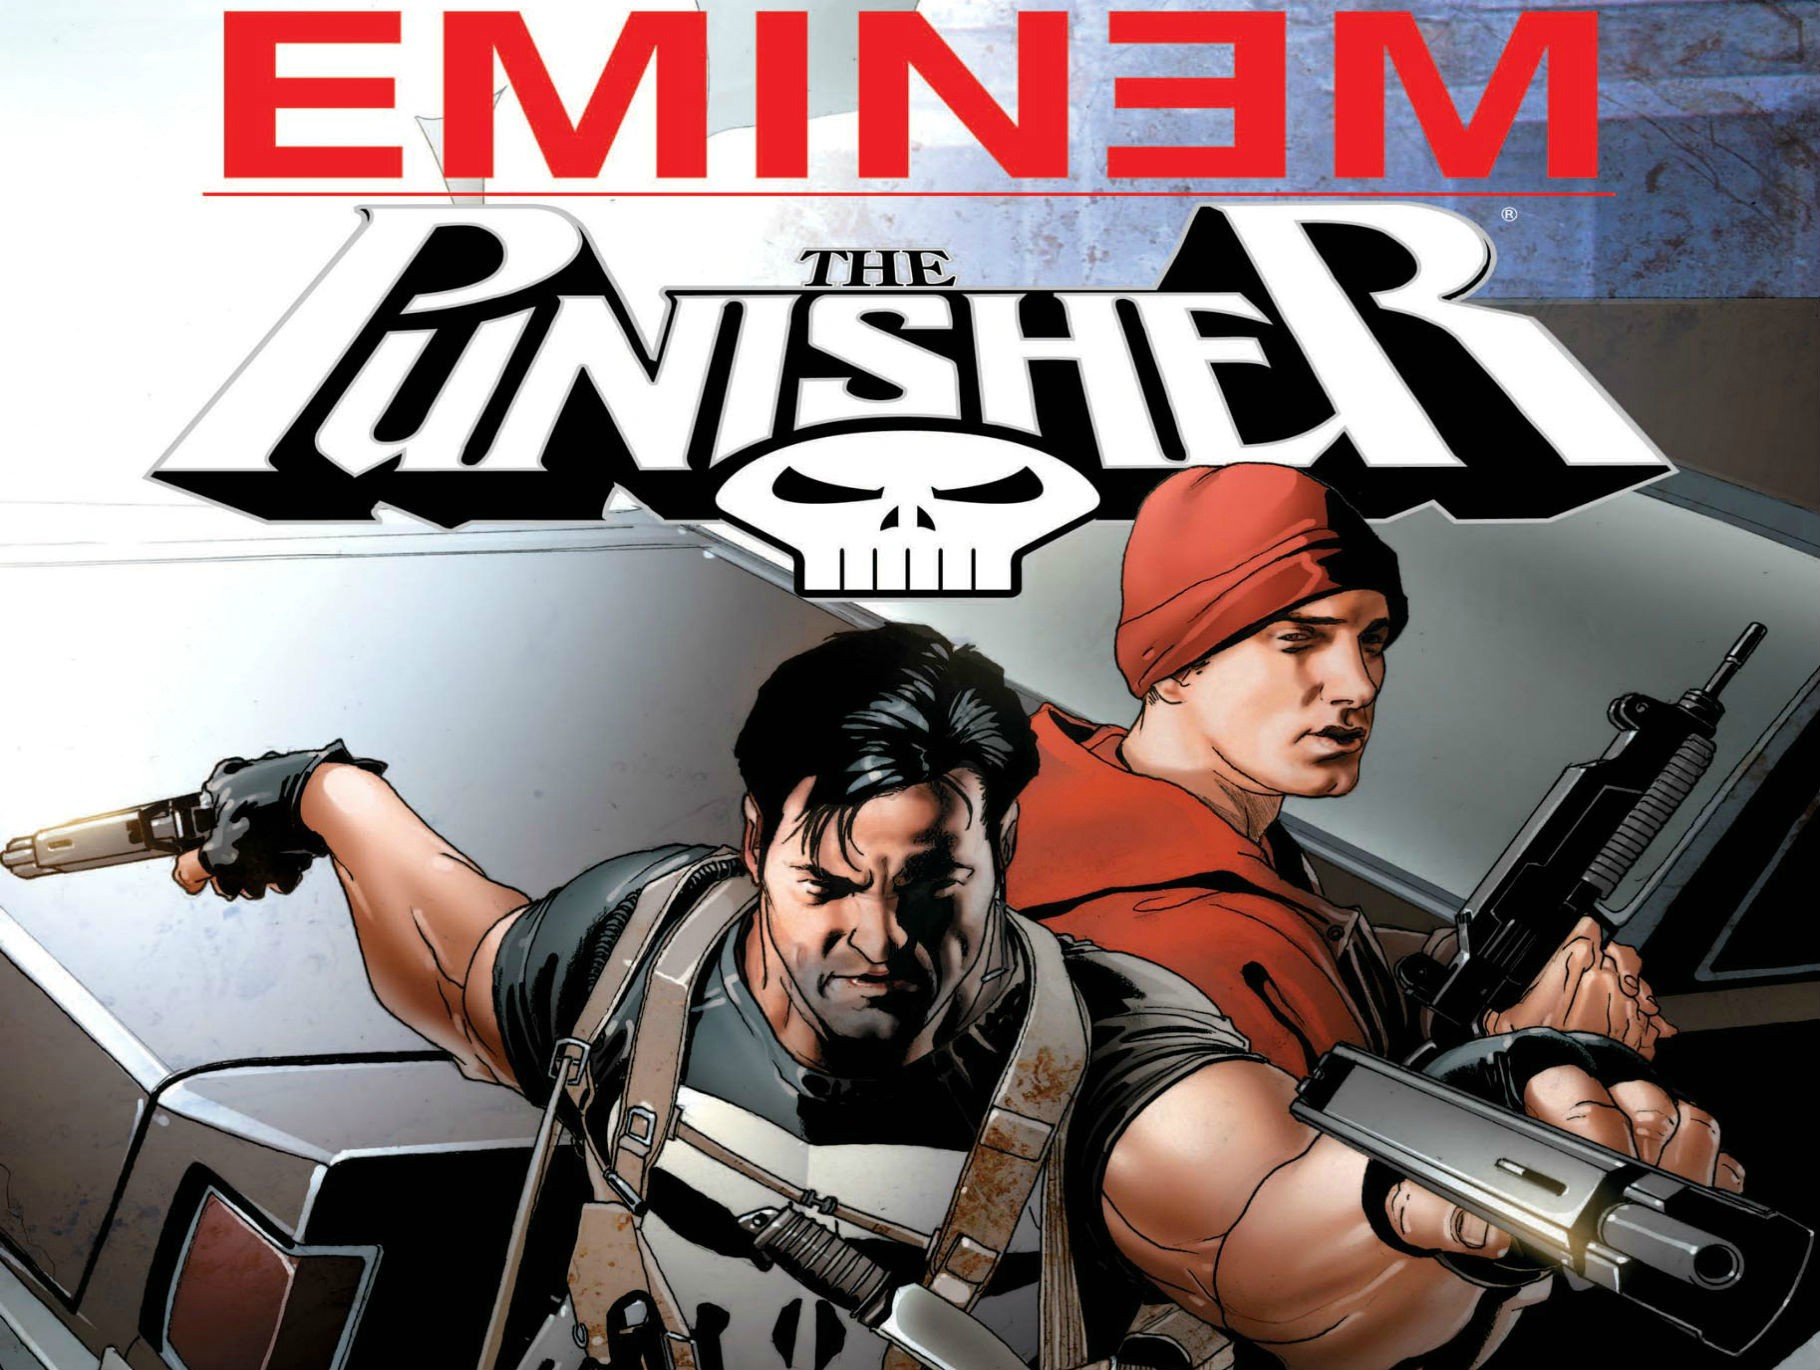 Eminem is a character in the Marvel universe.